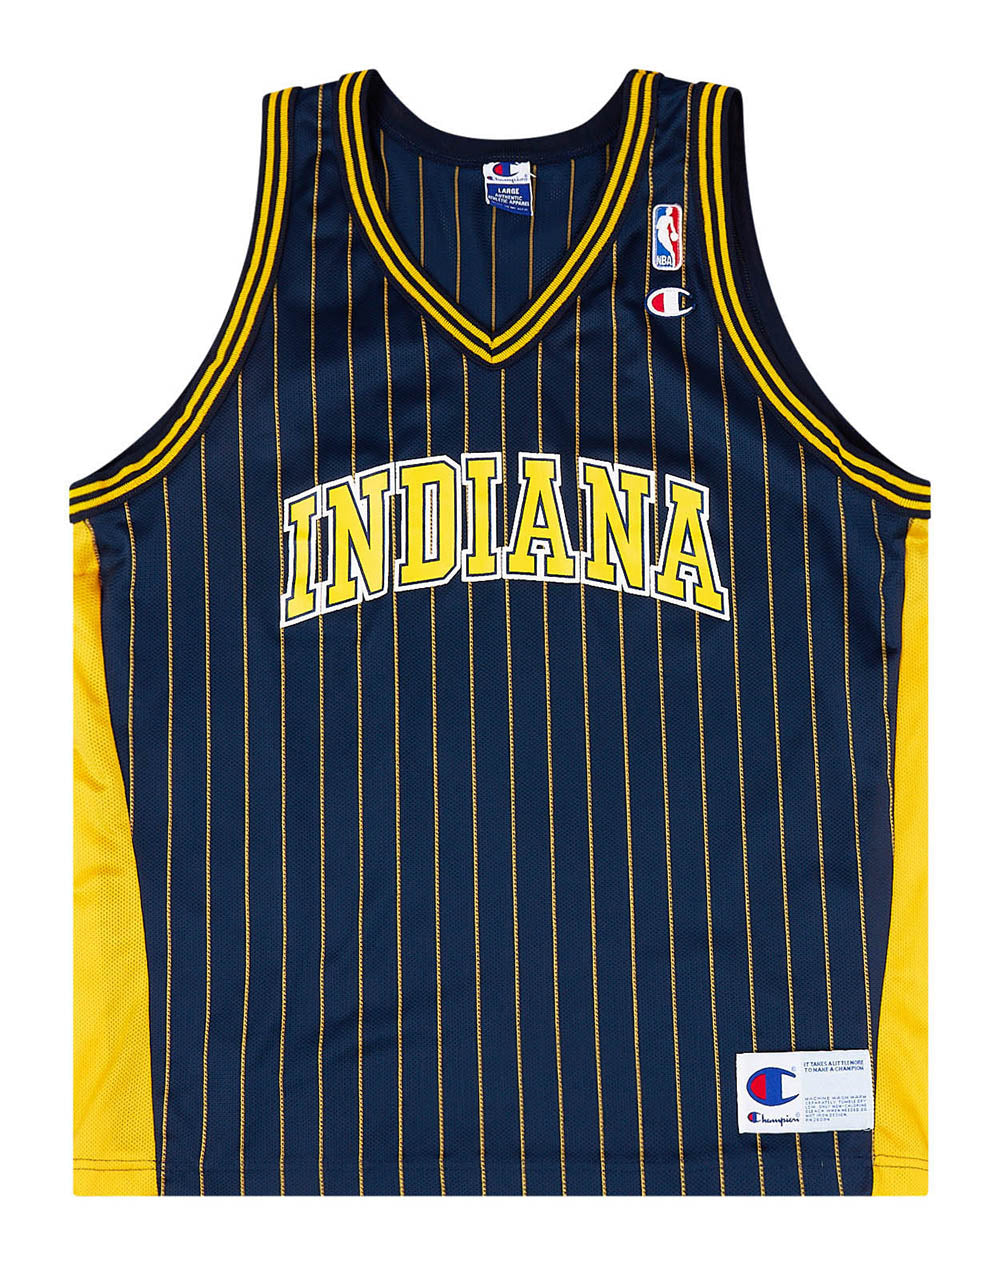 1997-02 INDIANA PACERS CHAMPION JERSEY (AWAY) L